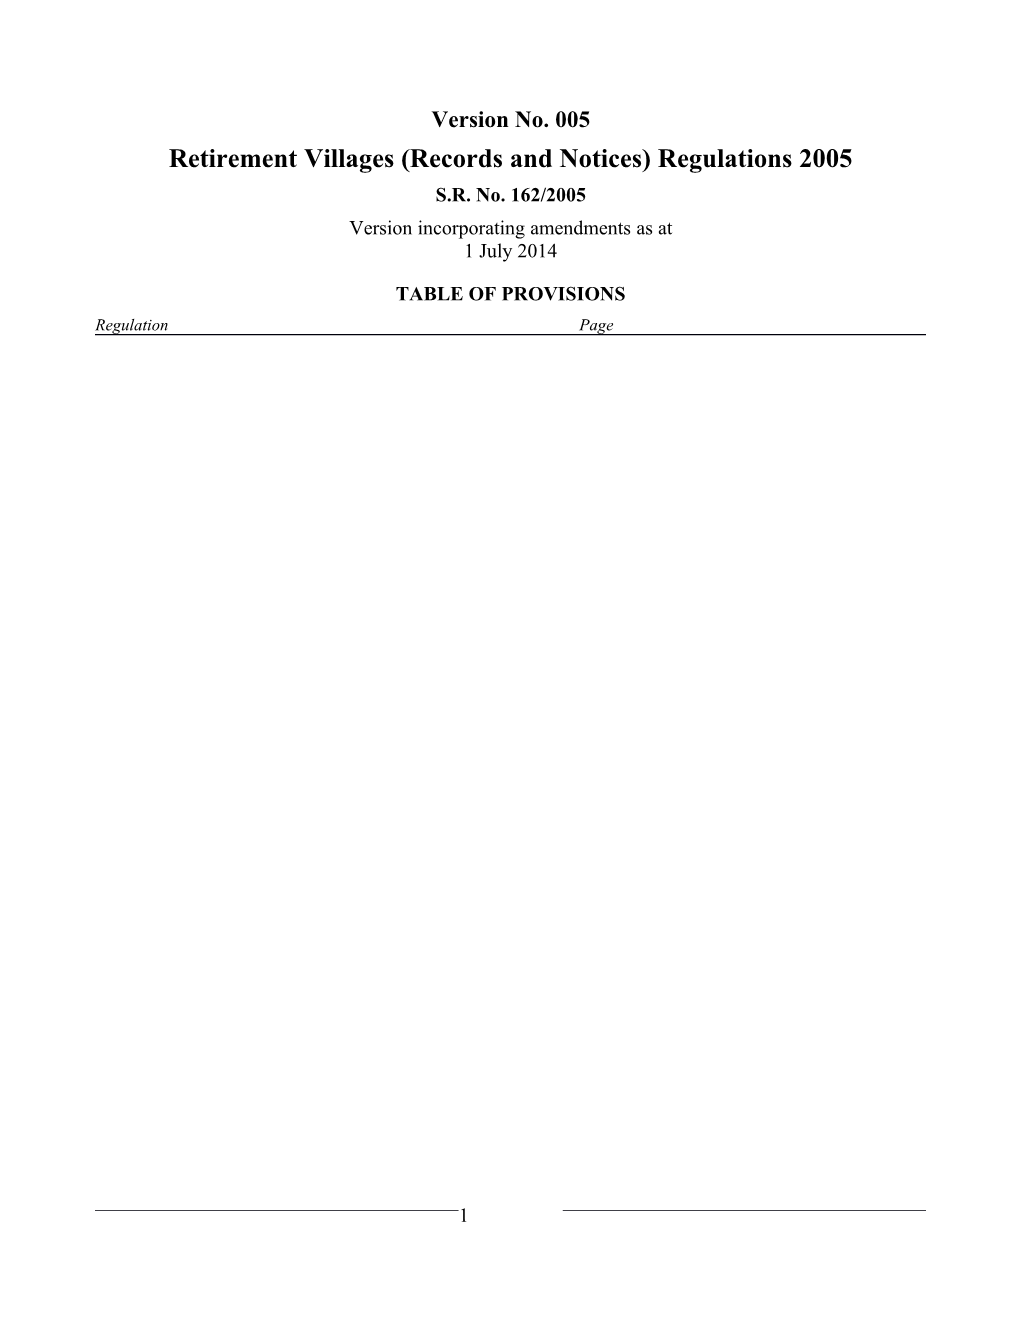 Retirement Villages (Records and Notices) Regulations 2005